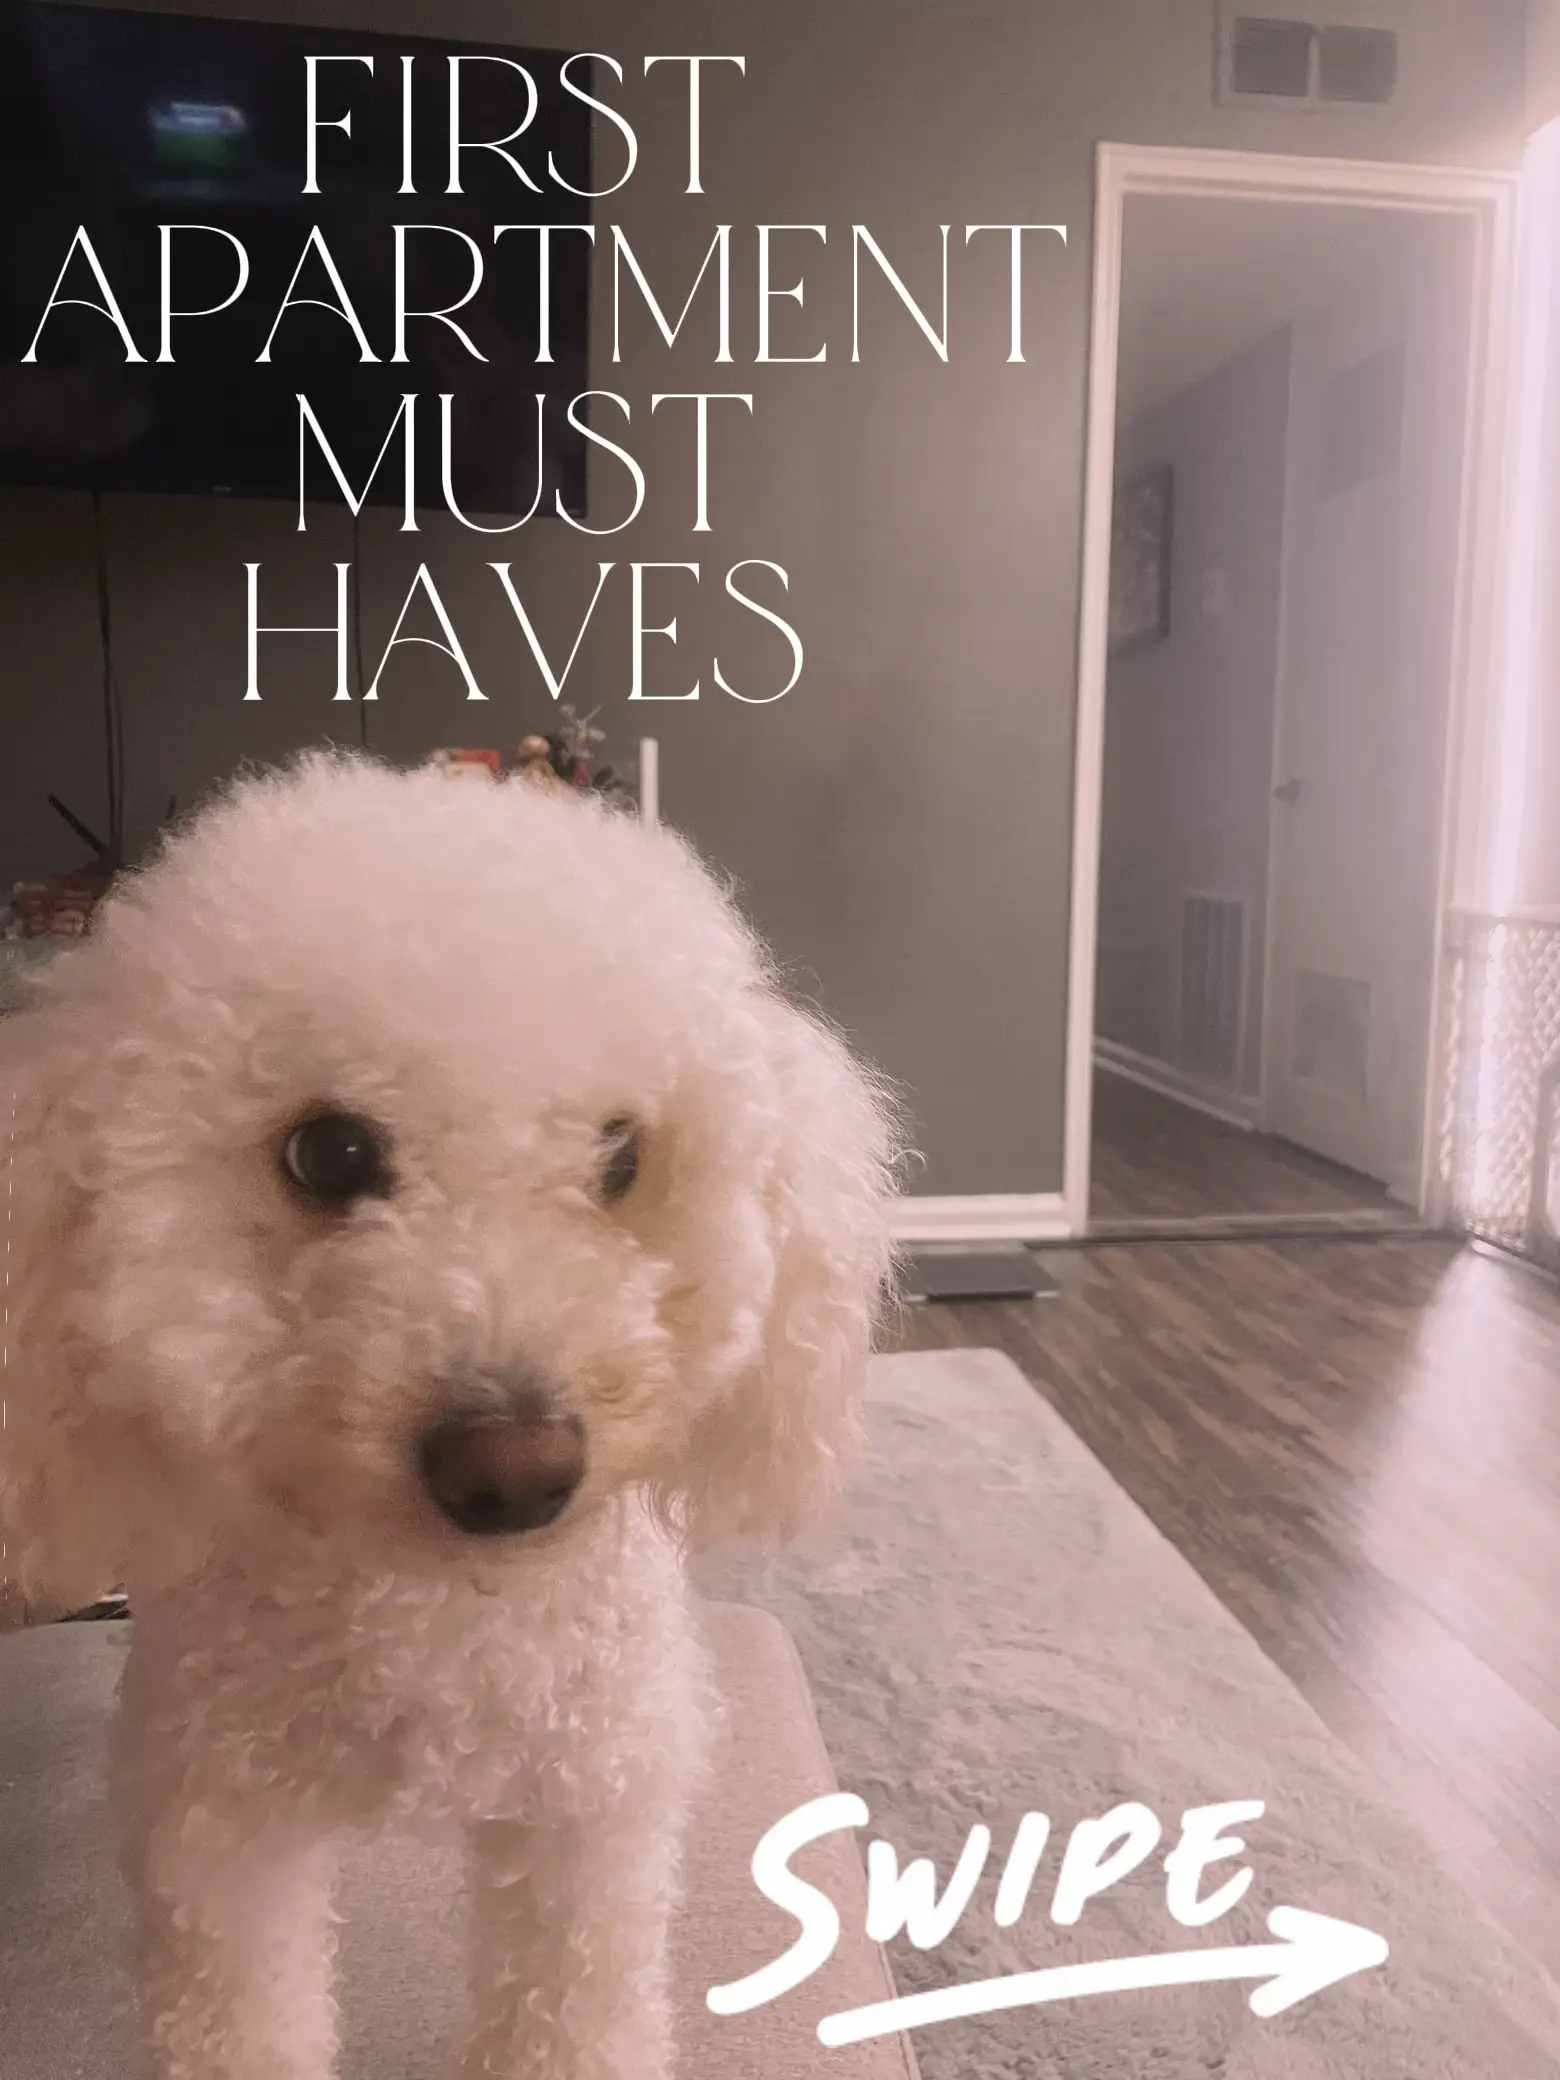 First Apartment Must Haves 's images